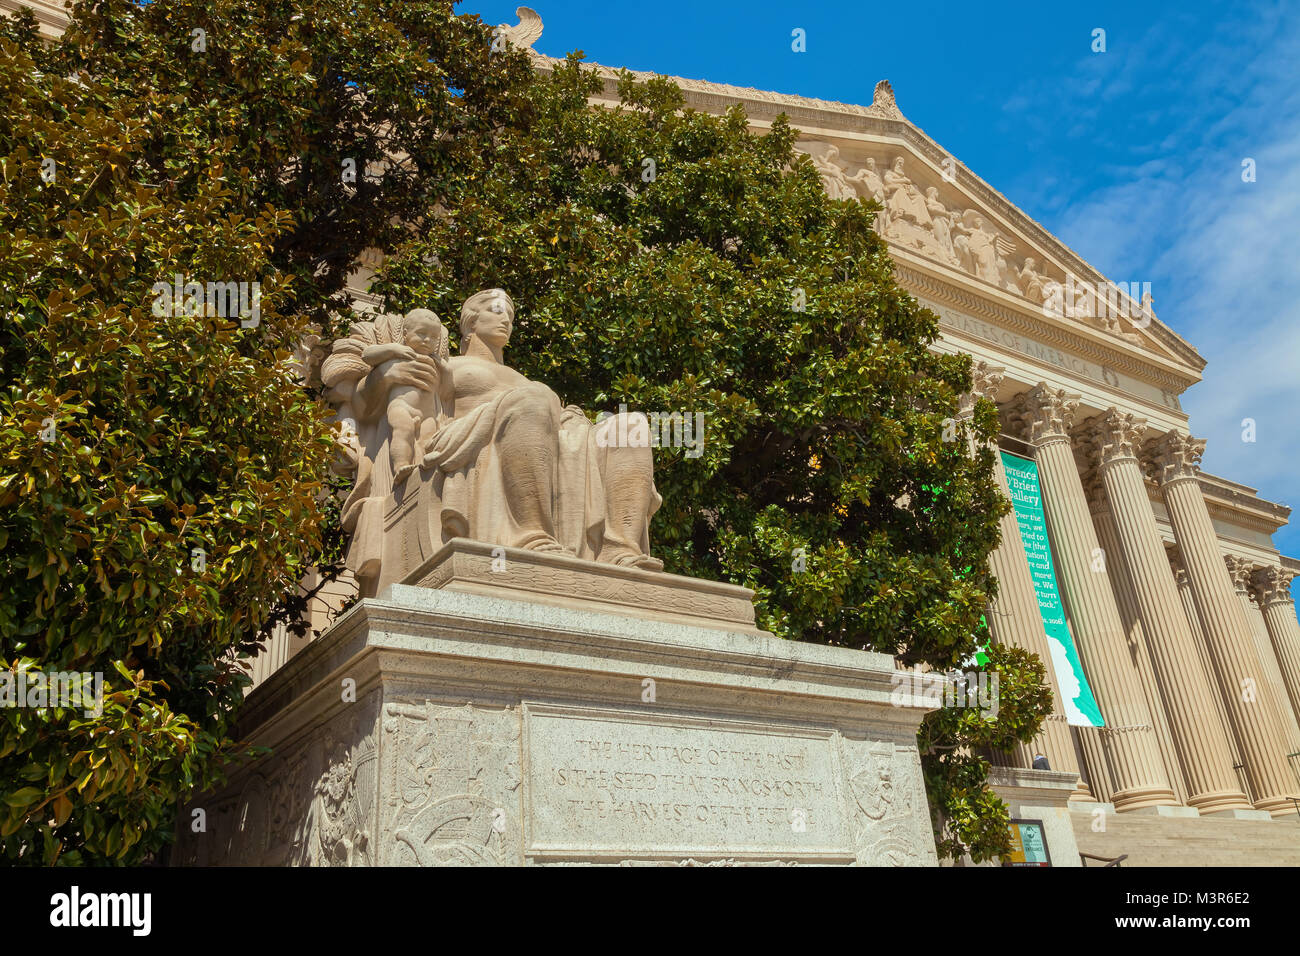 The Heritage sculpture outside of the National Archives Building in Washington, District of Columbia, United States. Stock Photo